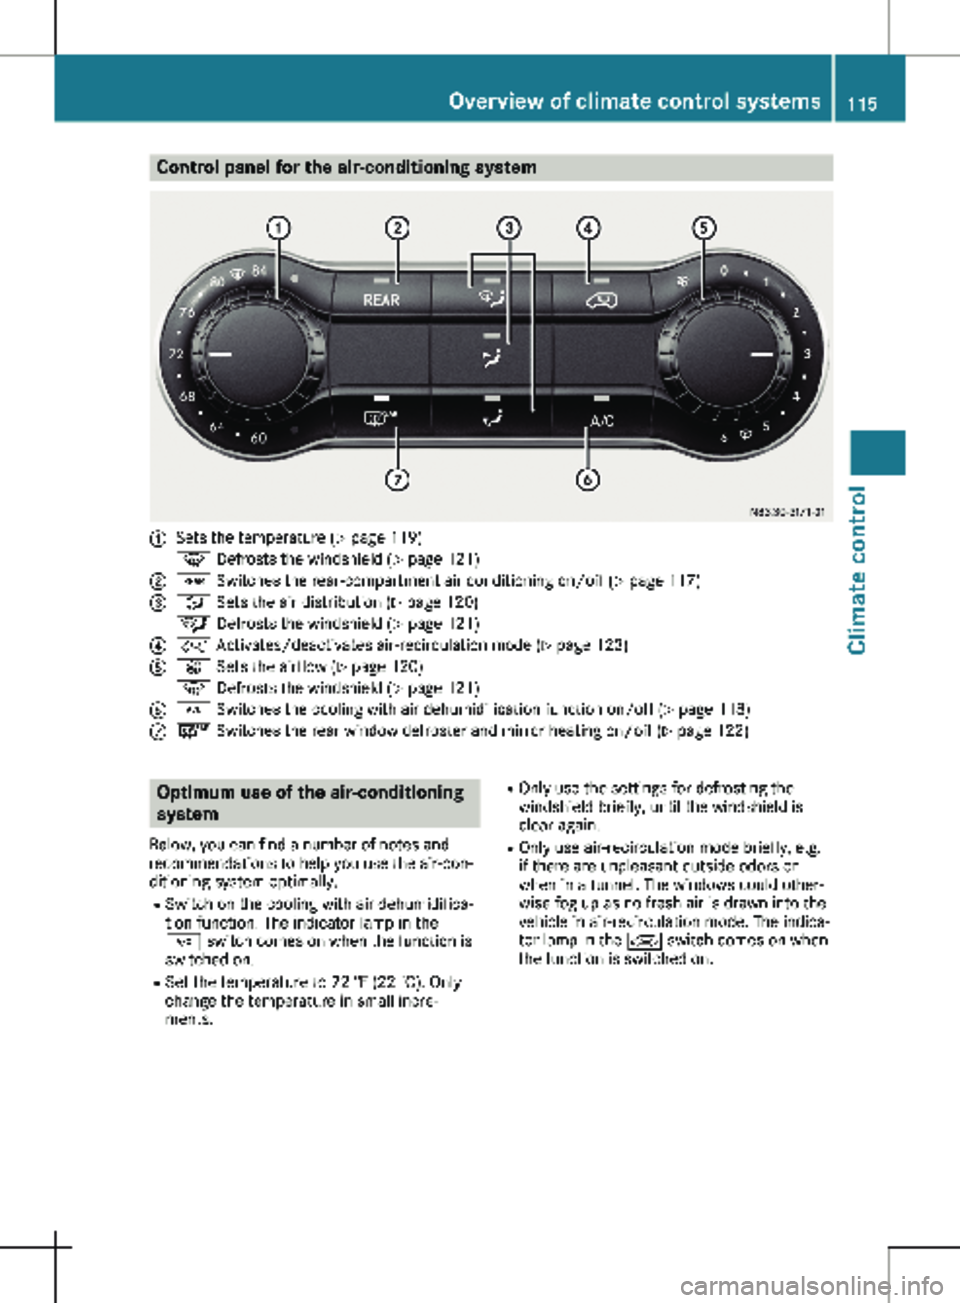 MERCEDES-BENZ METRIS 2020  MY20 Operator’s Manual Control panel for the air-conditioning system
:
Sets the temperature (Y page  119)
z Defrosts the windshield (Y page 
 121)
; / Switches the rear-compartment air conditioning on/off 
 (Y page 117)
= _